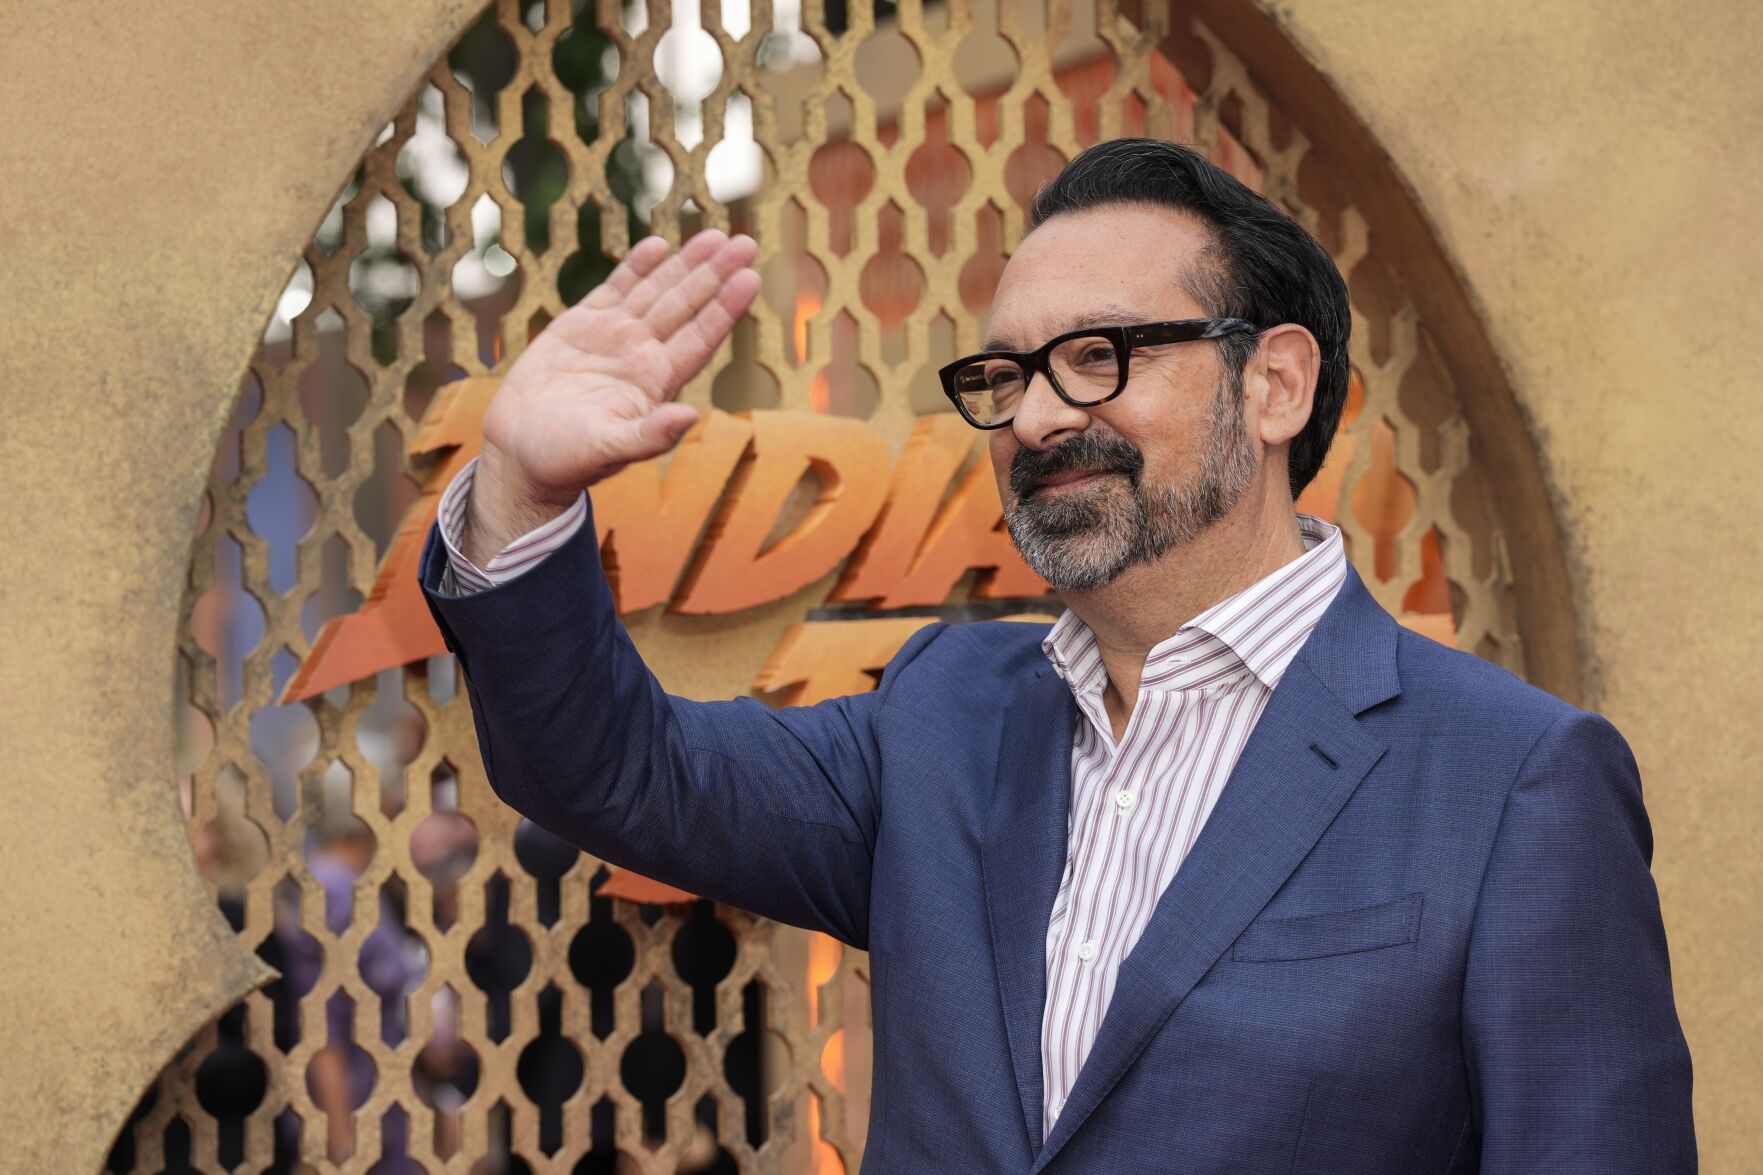 Director James Mangold poses for photographers upon arrival at the premiere of the film 'Indiana Jones and the Dial of Destiny' on Monday, June 26, 2023 in London.